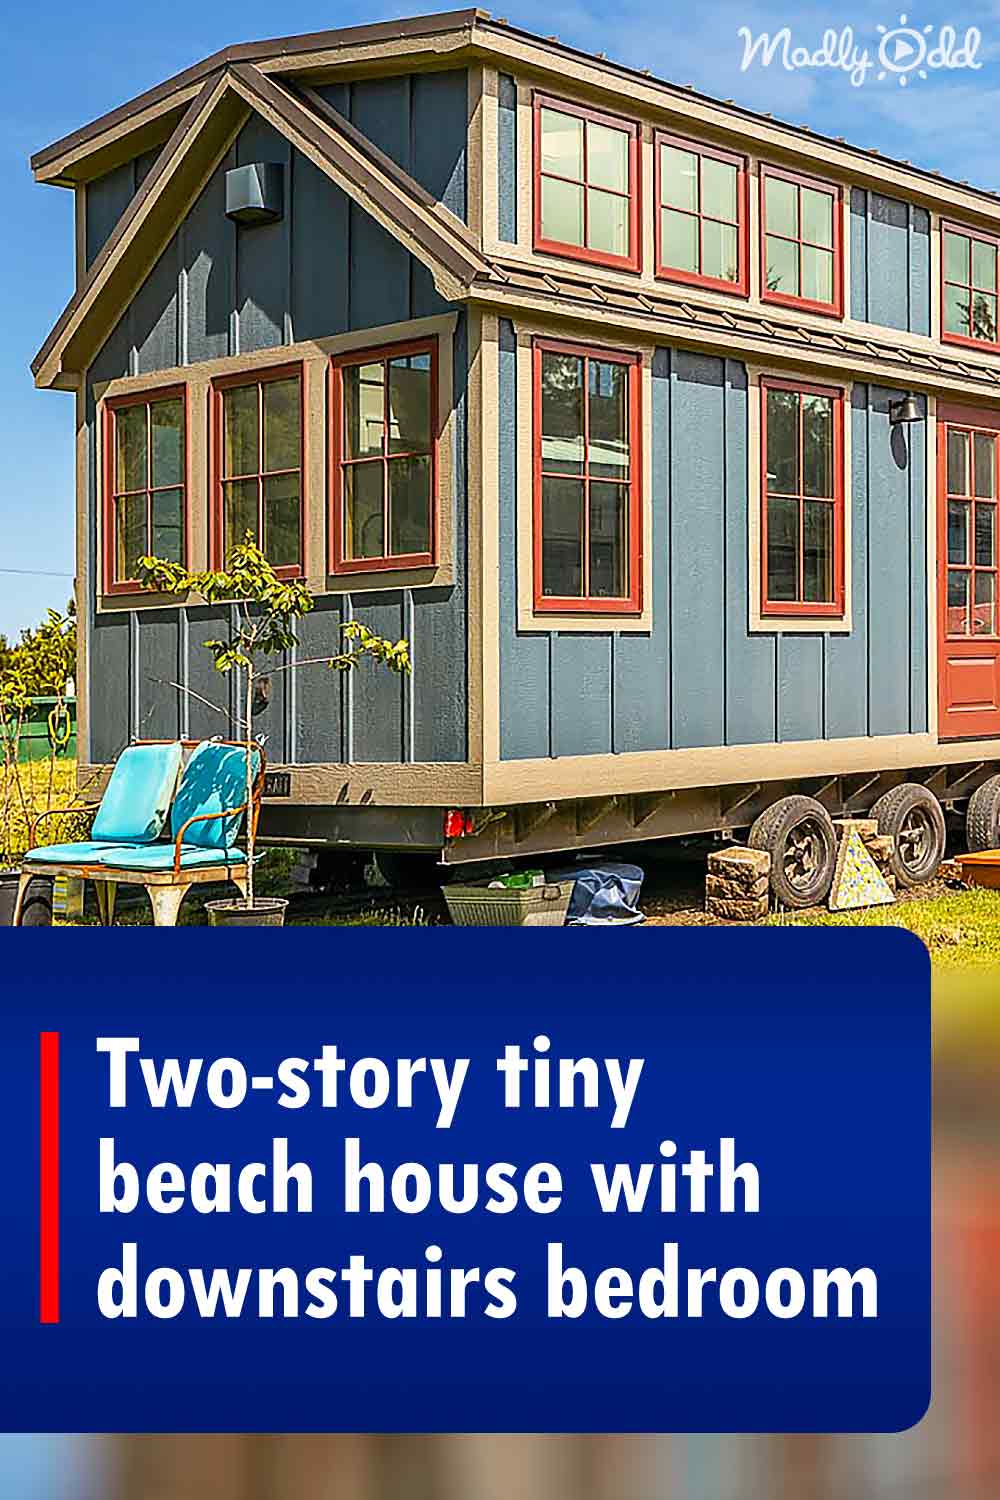 Two-story tiny beach house with downstairs bedroom